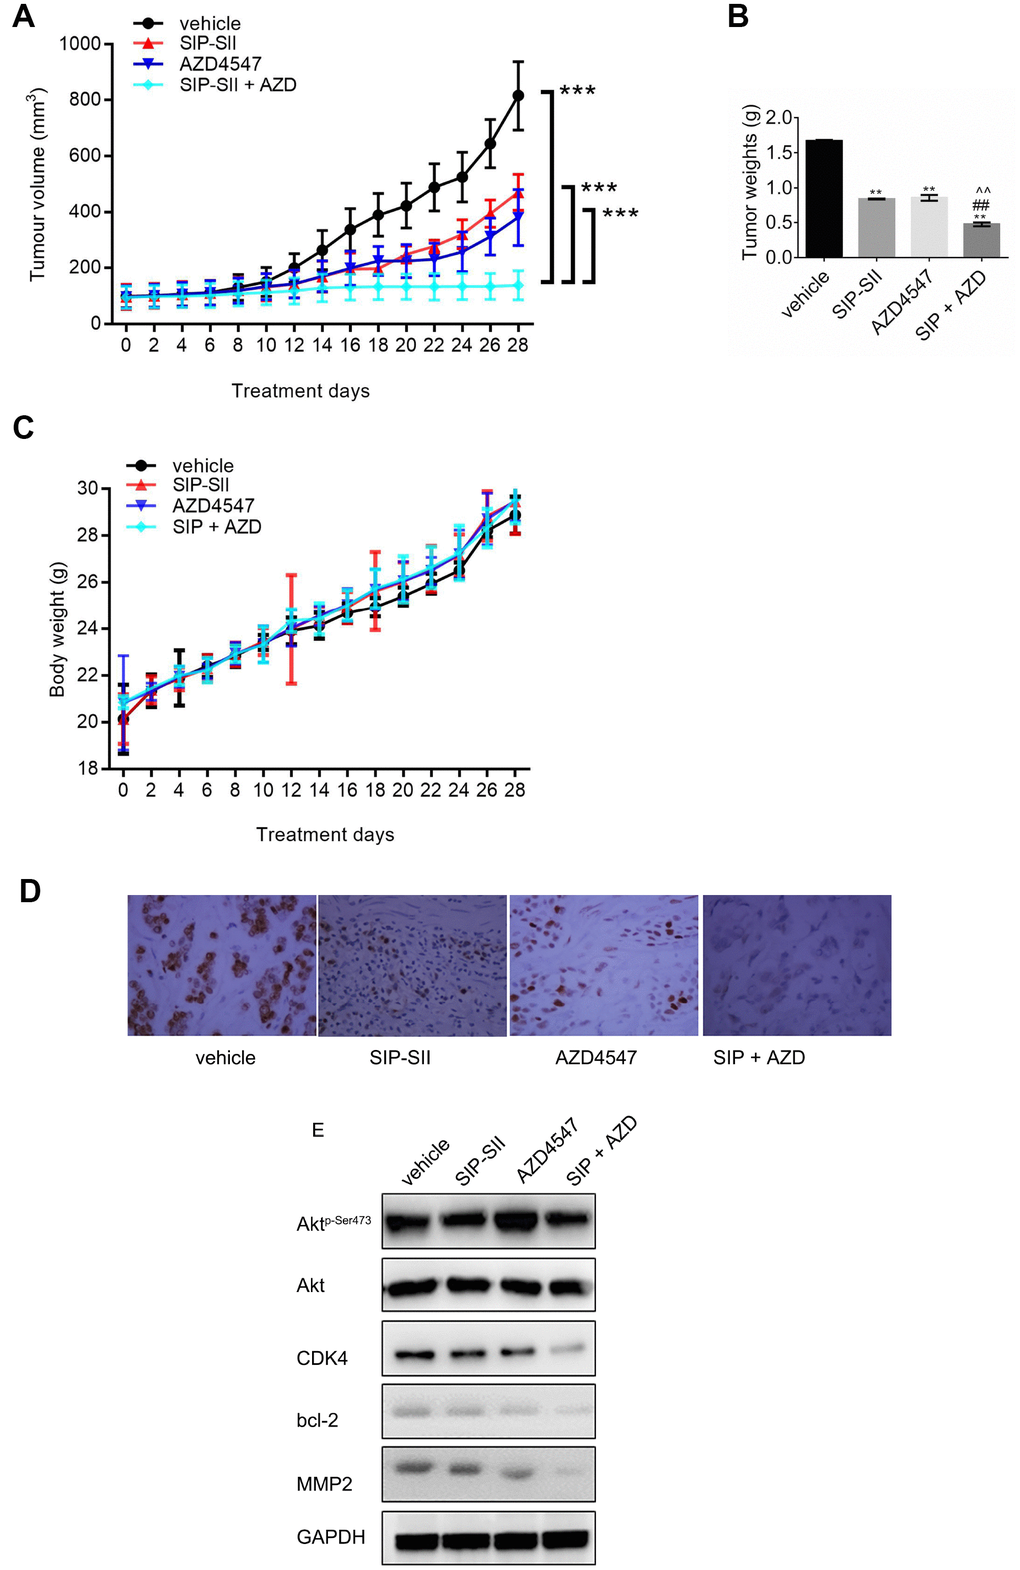 Combination of SIP-SII and AZD4547 enhances growth suppression of RT112 xenografts. Nude mice were randomly divided into four experimental groups after subcutaneous injection of RT112 cells. (A) Tumor volume measurements. (B) Tumor weight measurements after euthanasia on day 28 post-treatment initiation. (C) Body weight measurements. ***P D) Immunohistochemical staining of phospho-Akt in excised tumors (vehicle, SIP-SII, AZD4547, and combination therapy). Representative images at 100x magnification. (E) Western blot analysis of tumor samples.